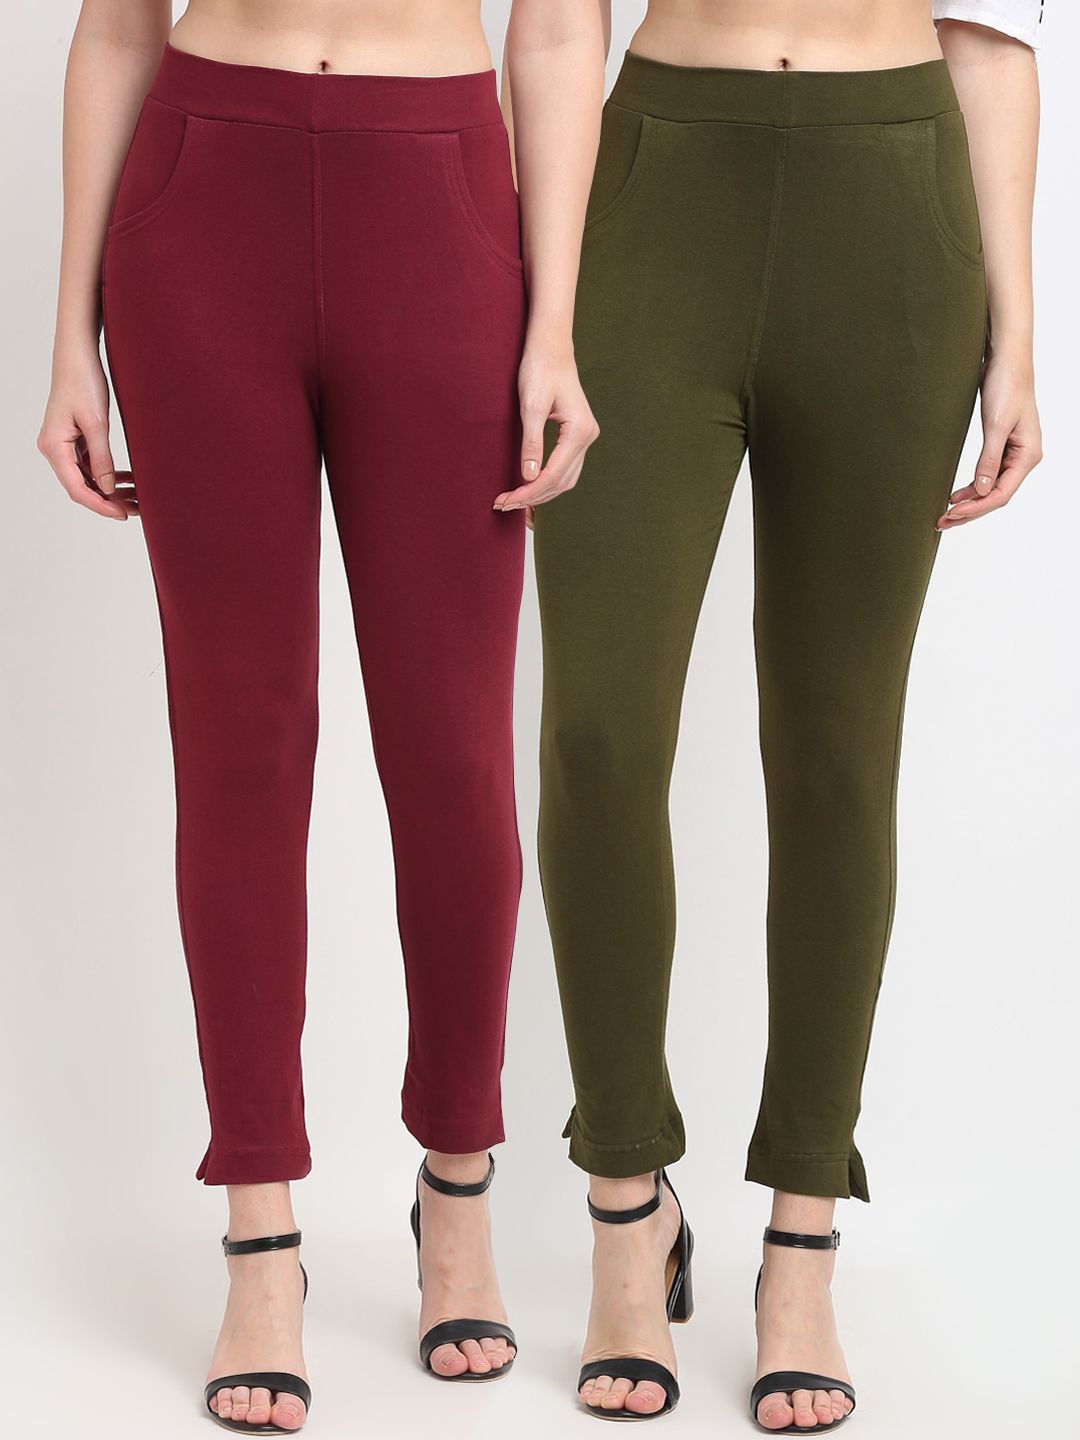 TAG 7 Women Maroon & Olive Green Pack of 2 Leggings Price in India